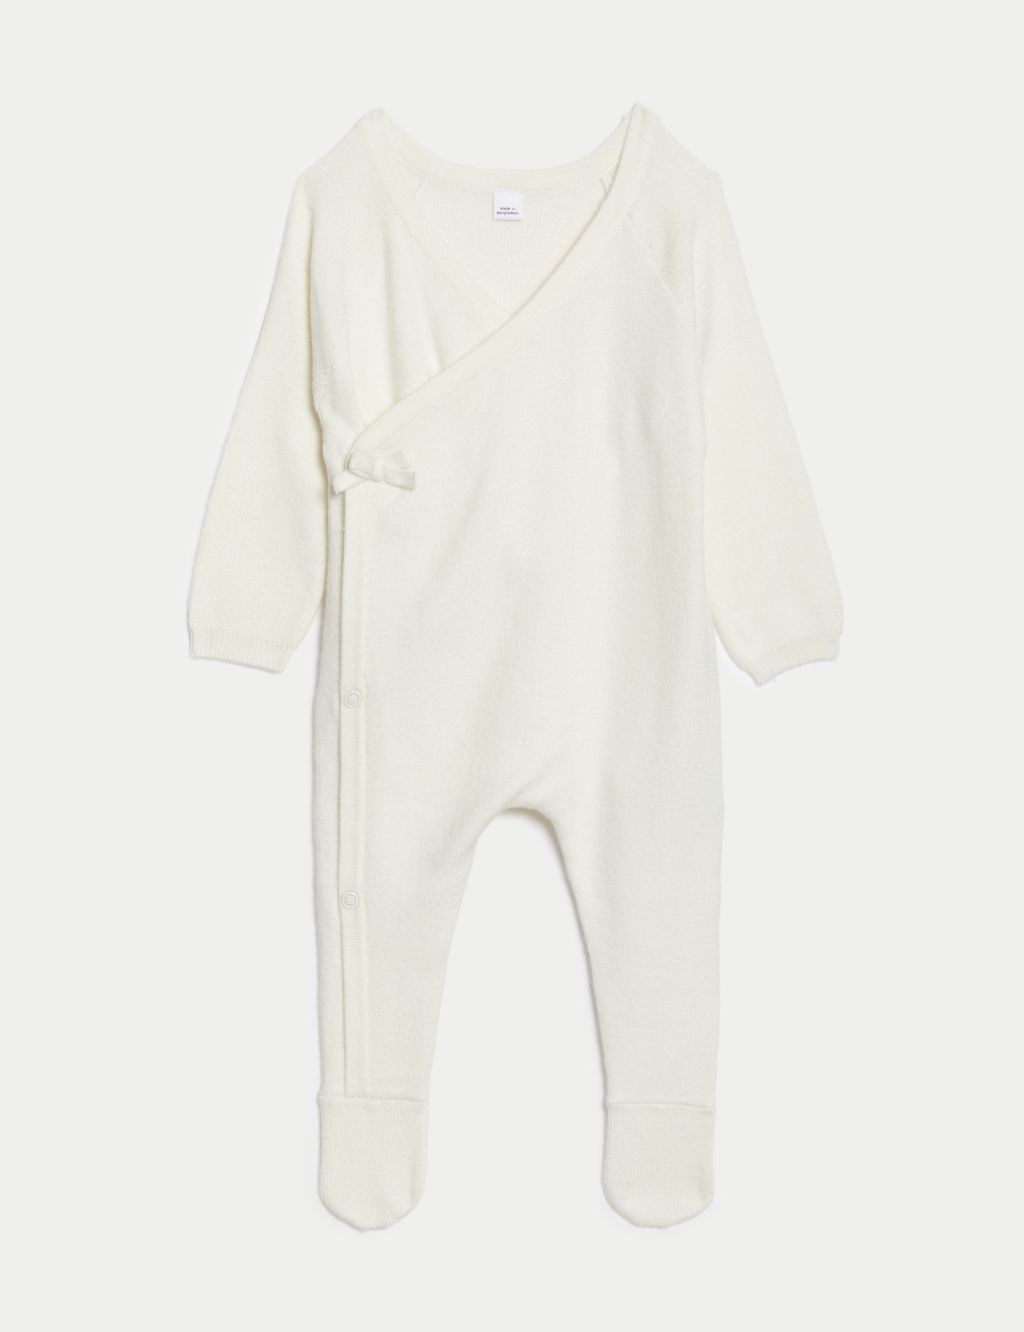 Knitted Sleepsuit (0-1 Yrs) image 2